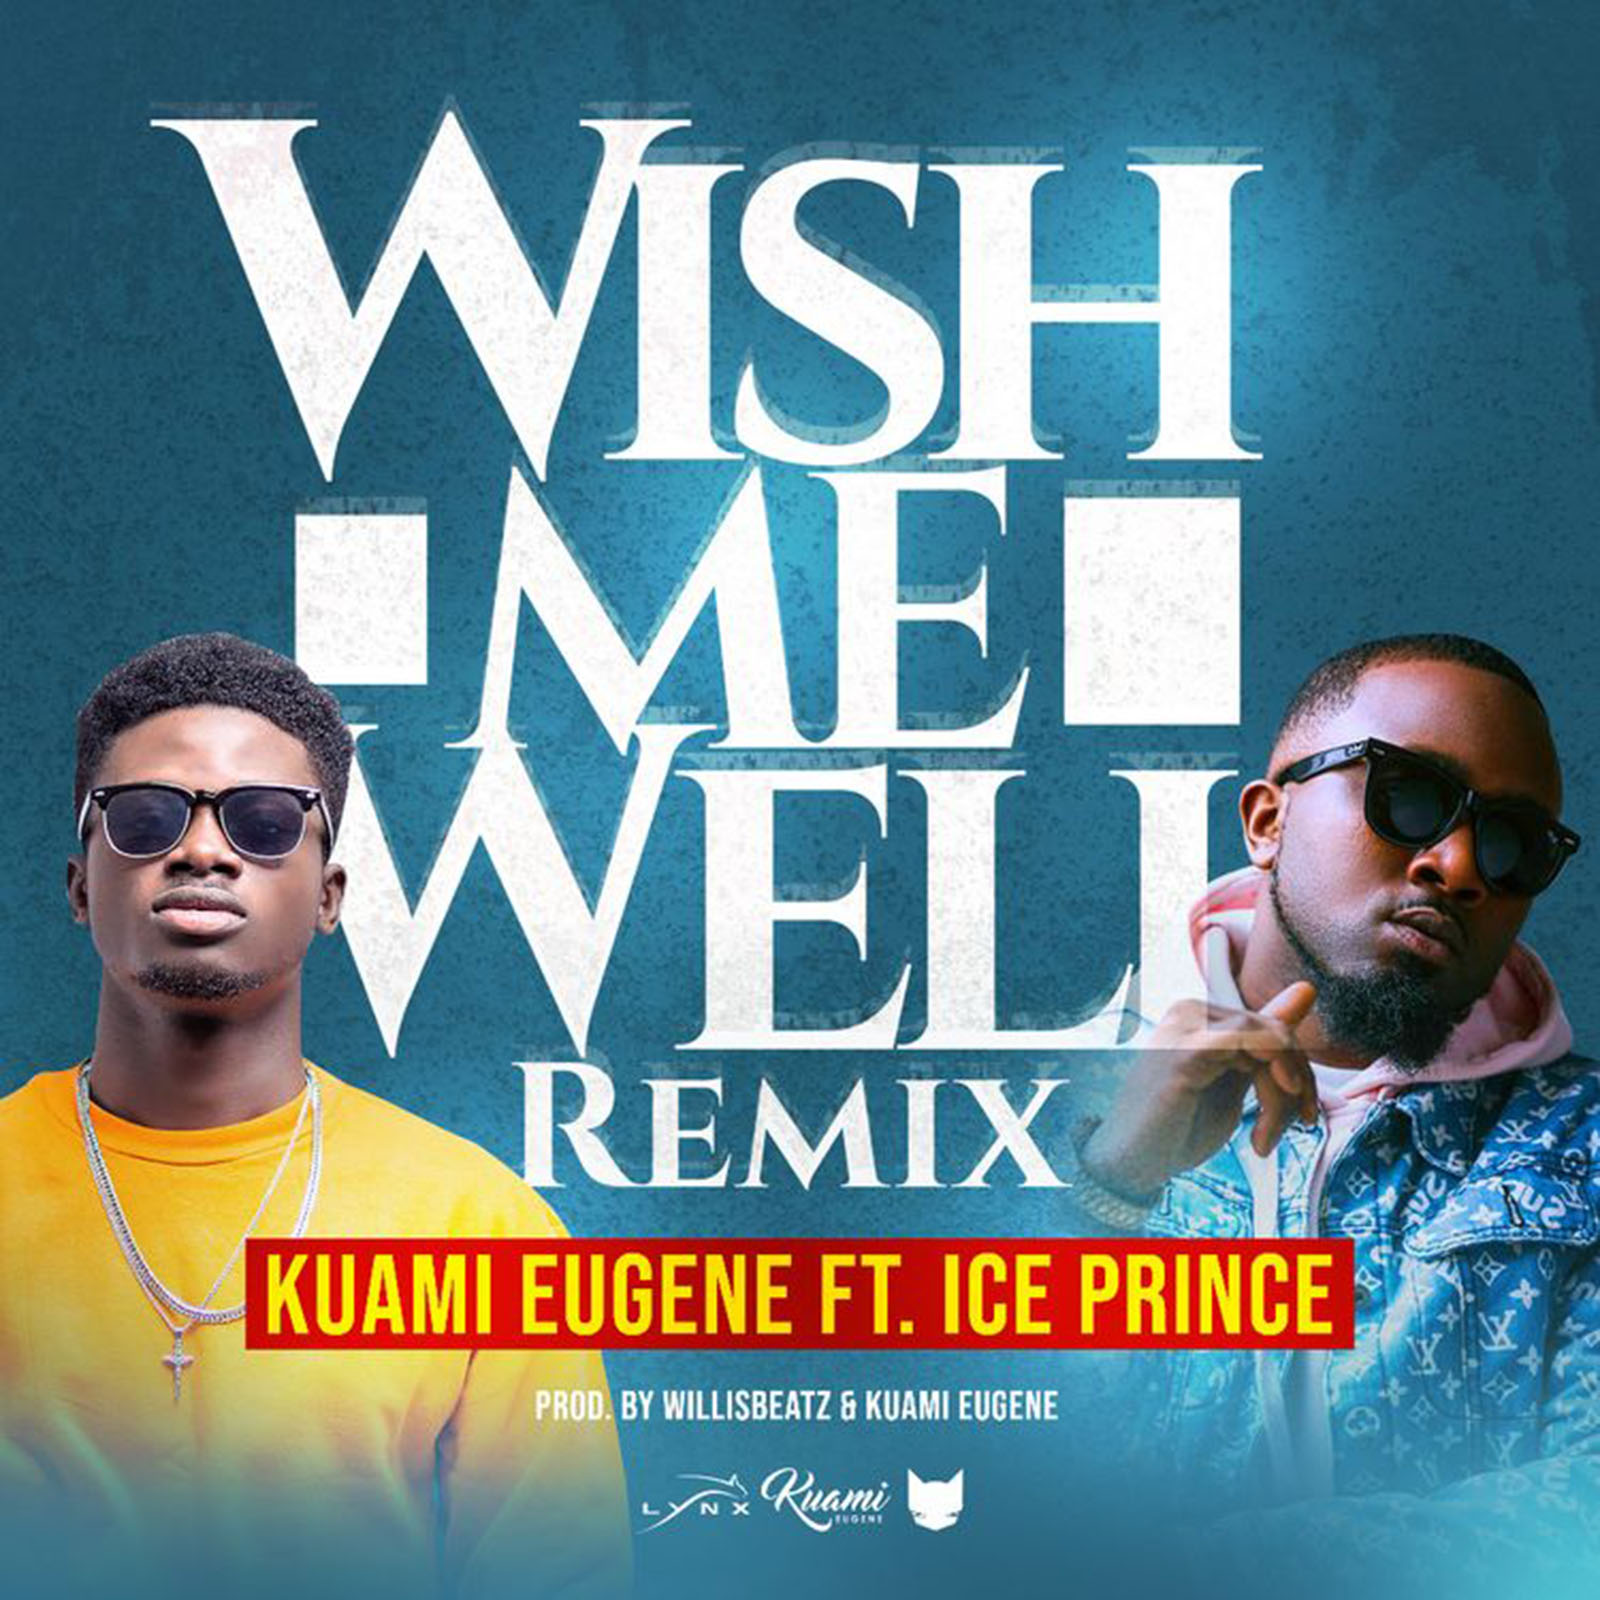 Wish You Well Remix by Kuami Eugene feat. Ice Prince